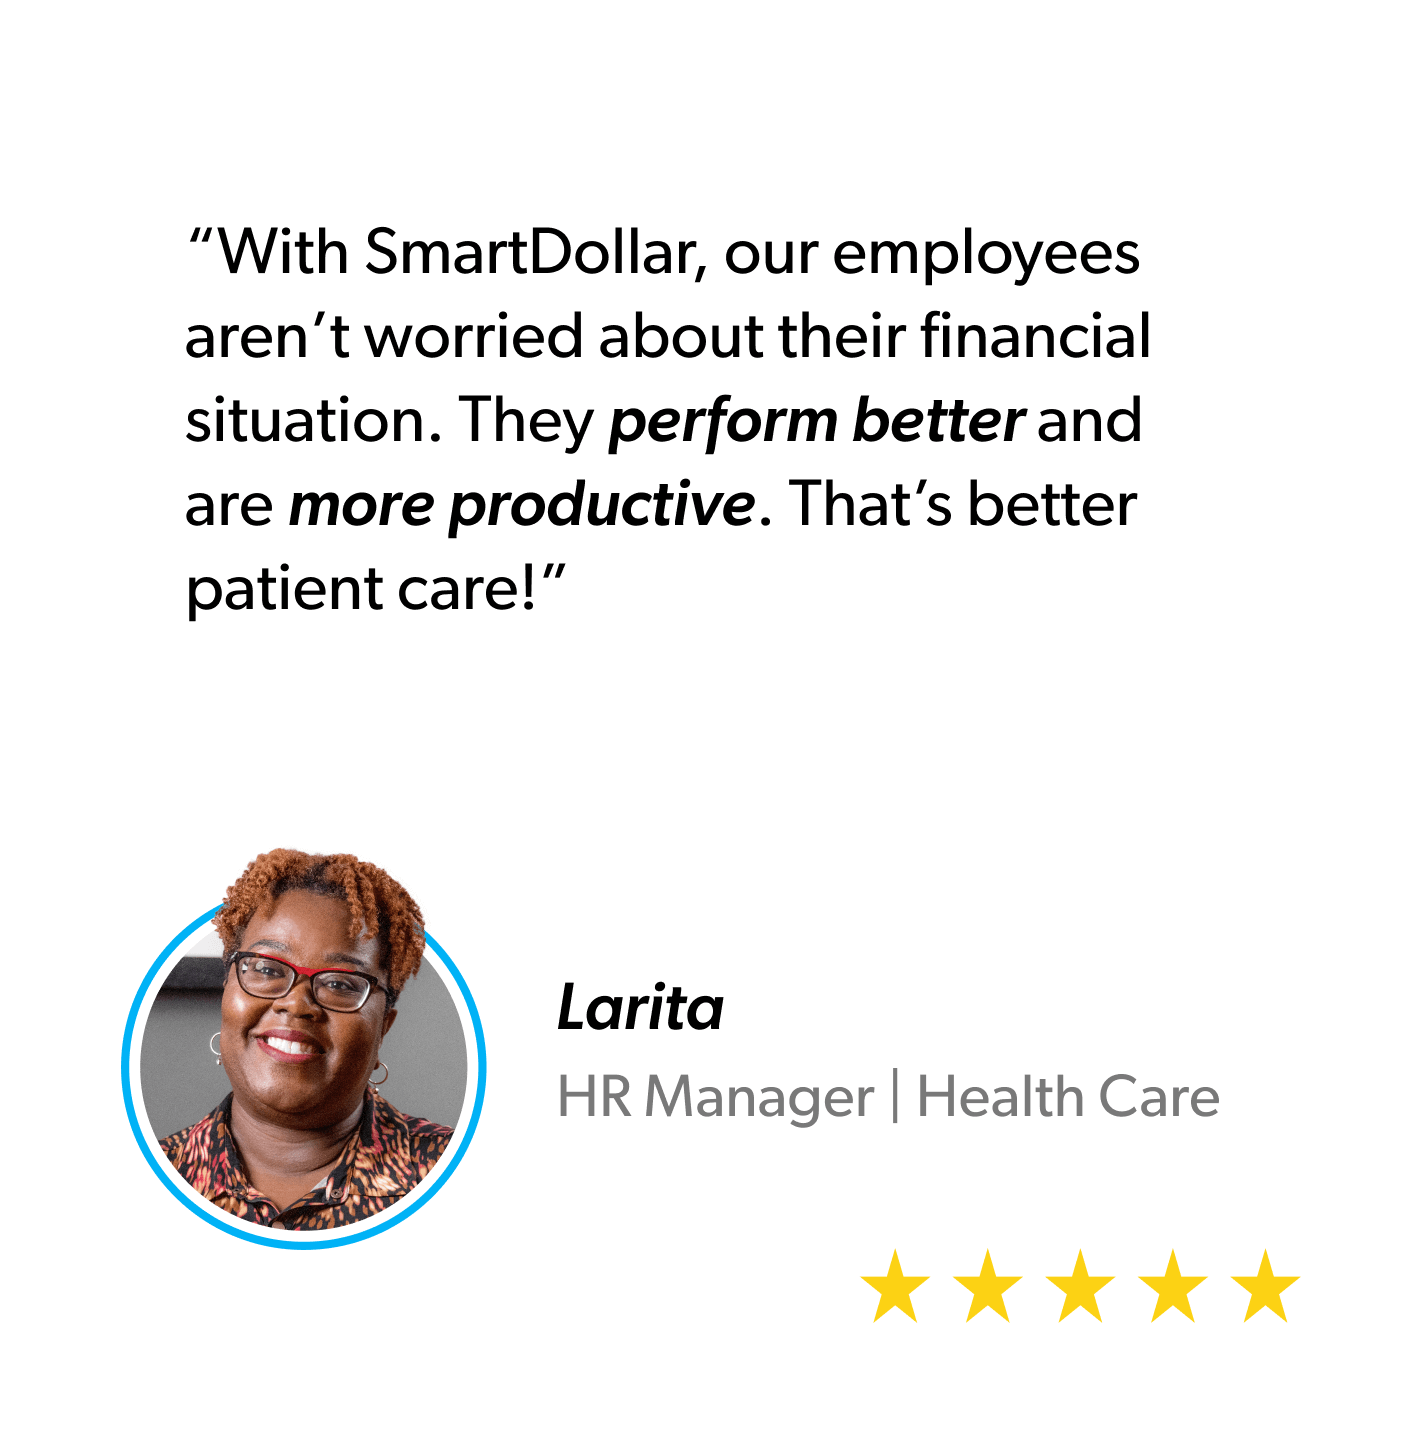 “With SmartDollar, our employees aren’t worried about their financial situation. They perform better and are more productive. That’s better patient care!" - Larita, HR Manager, Healthcare